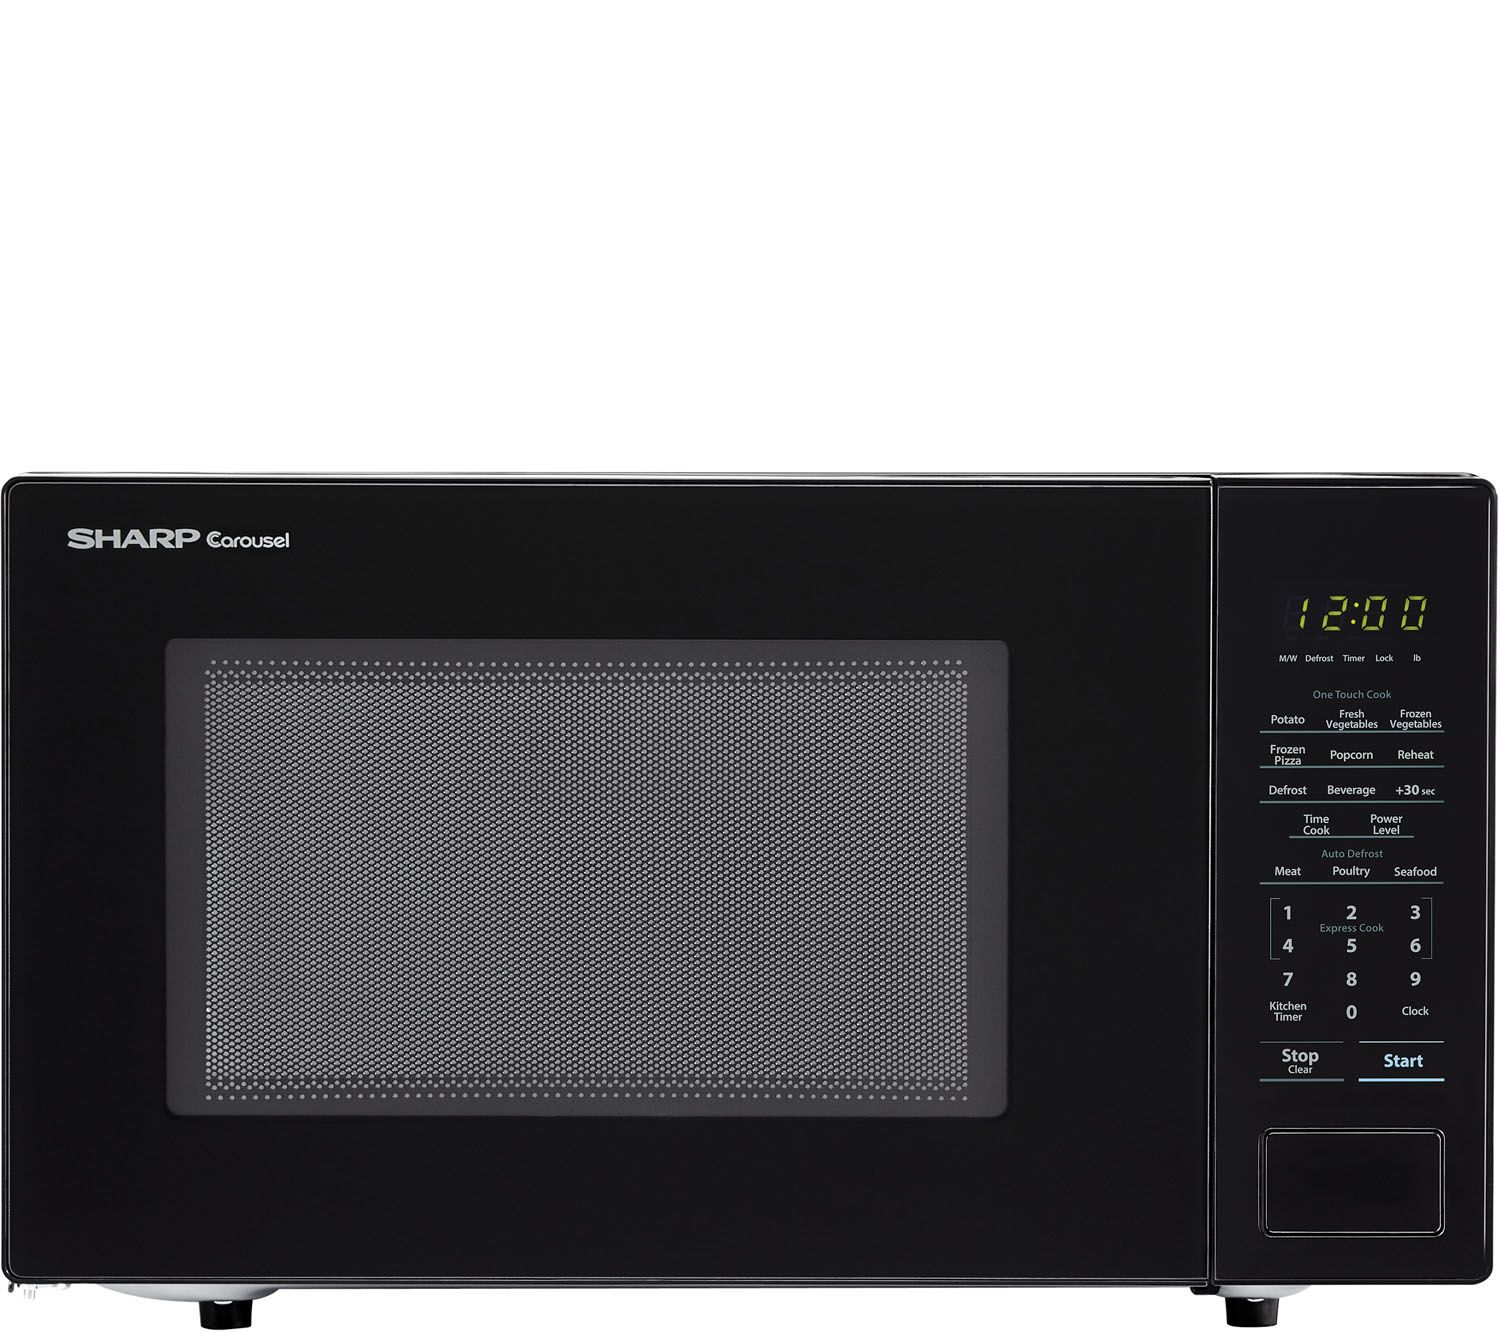 Sharp Carousel 1 1 Cu Ft 1000w Countertop Microwave Oven